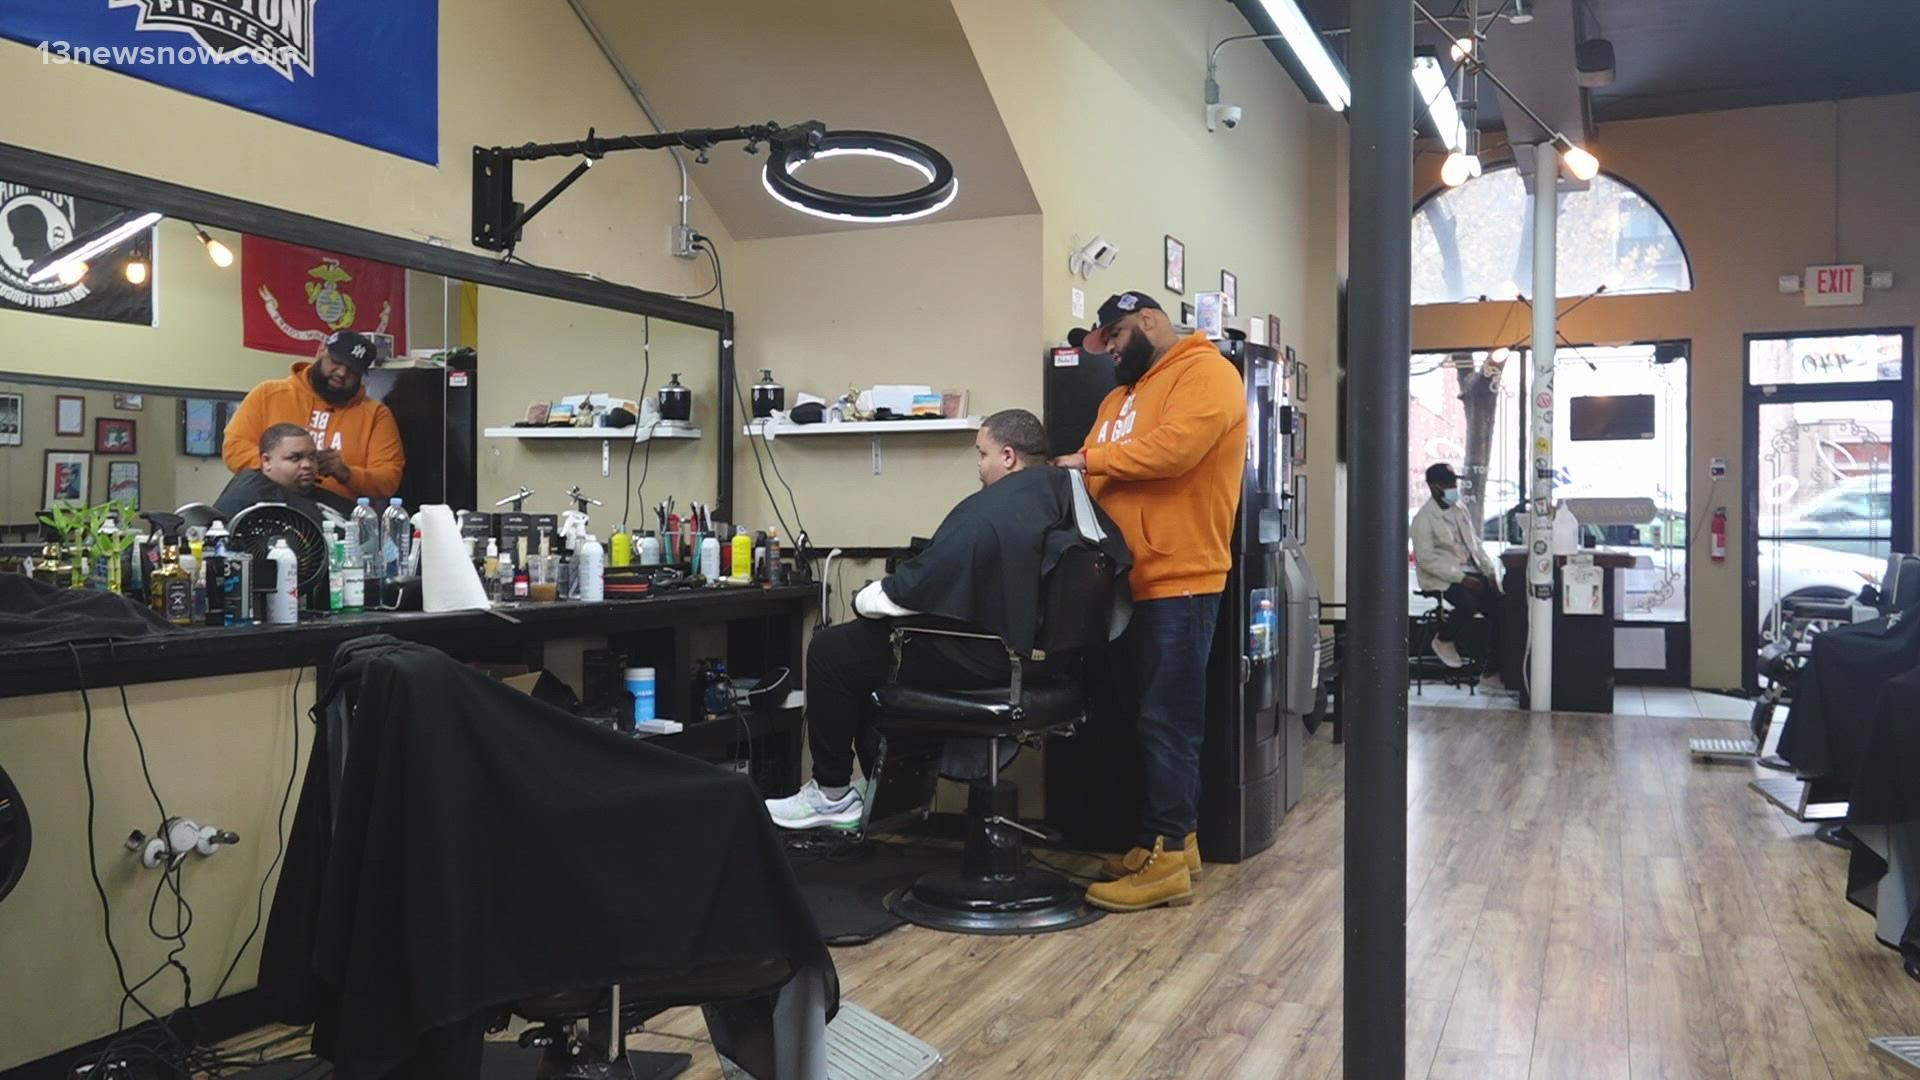 The owner of VIP Lounge, Nado Garcia, said he’s trying to change the world one haircut at a time.